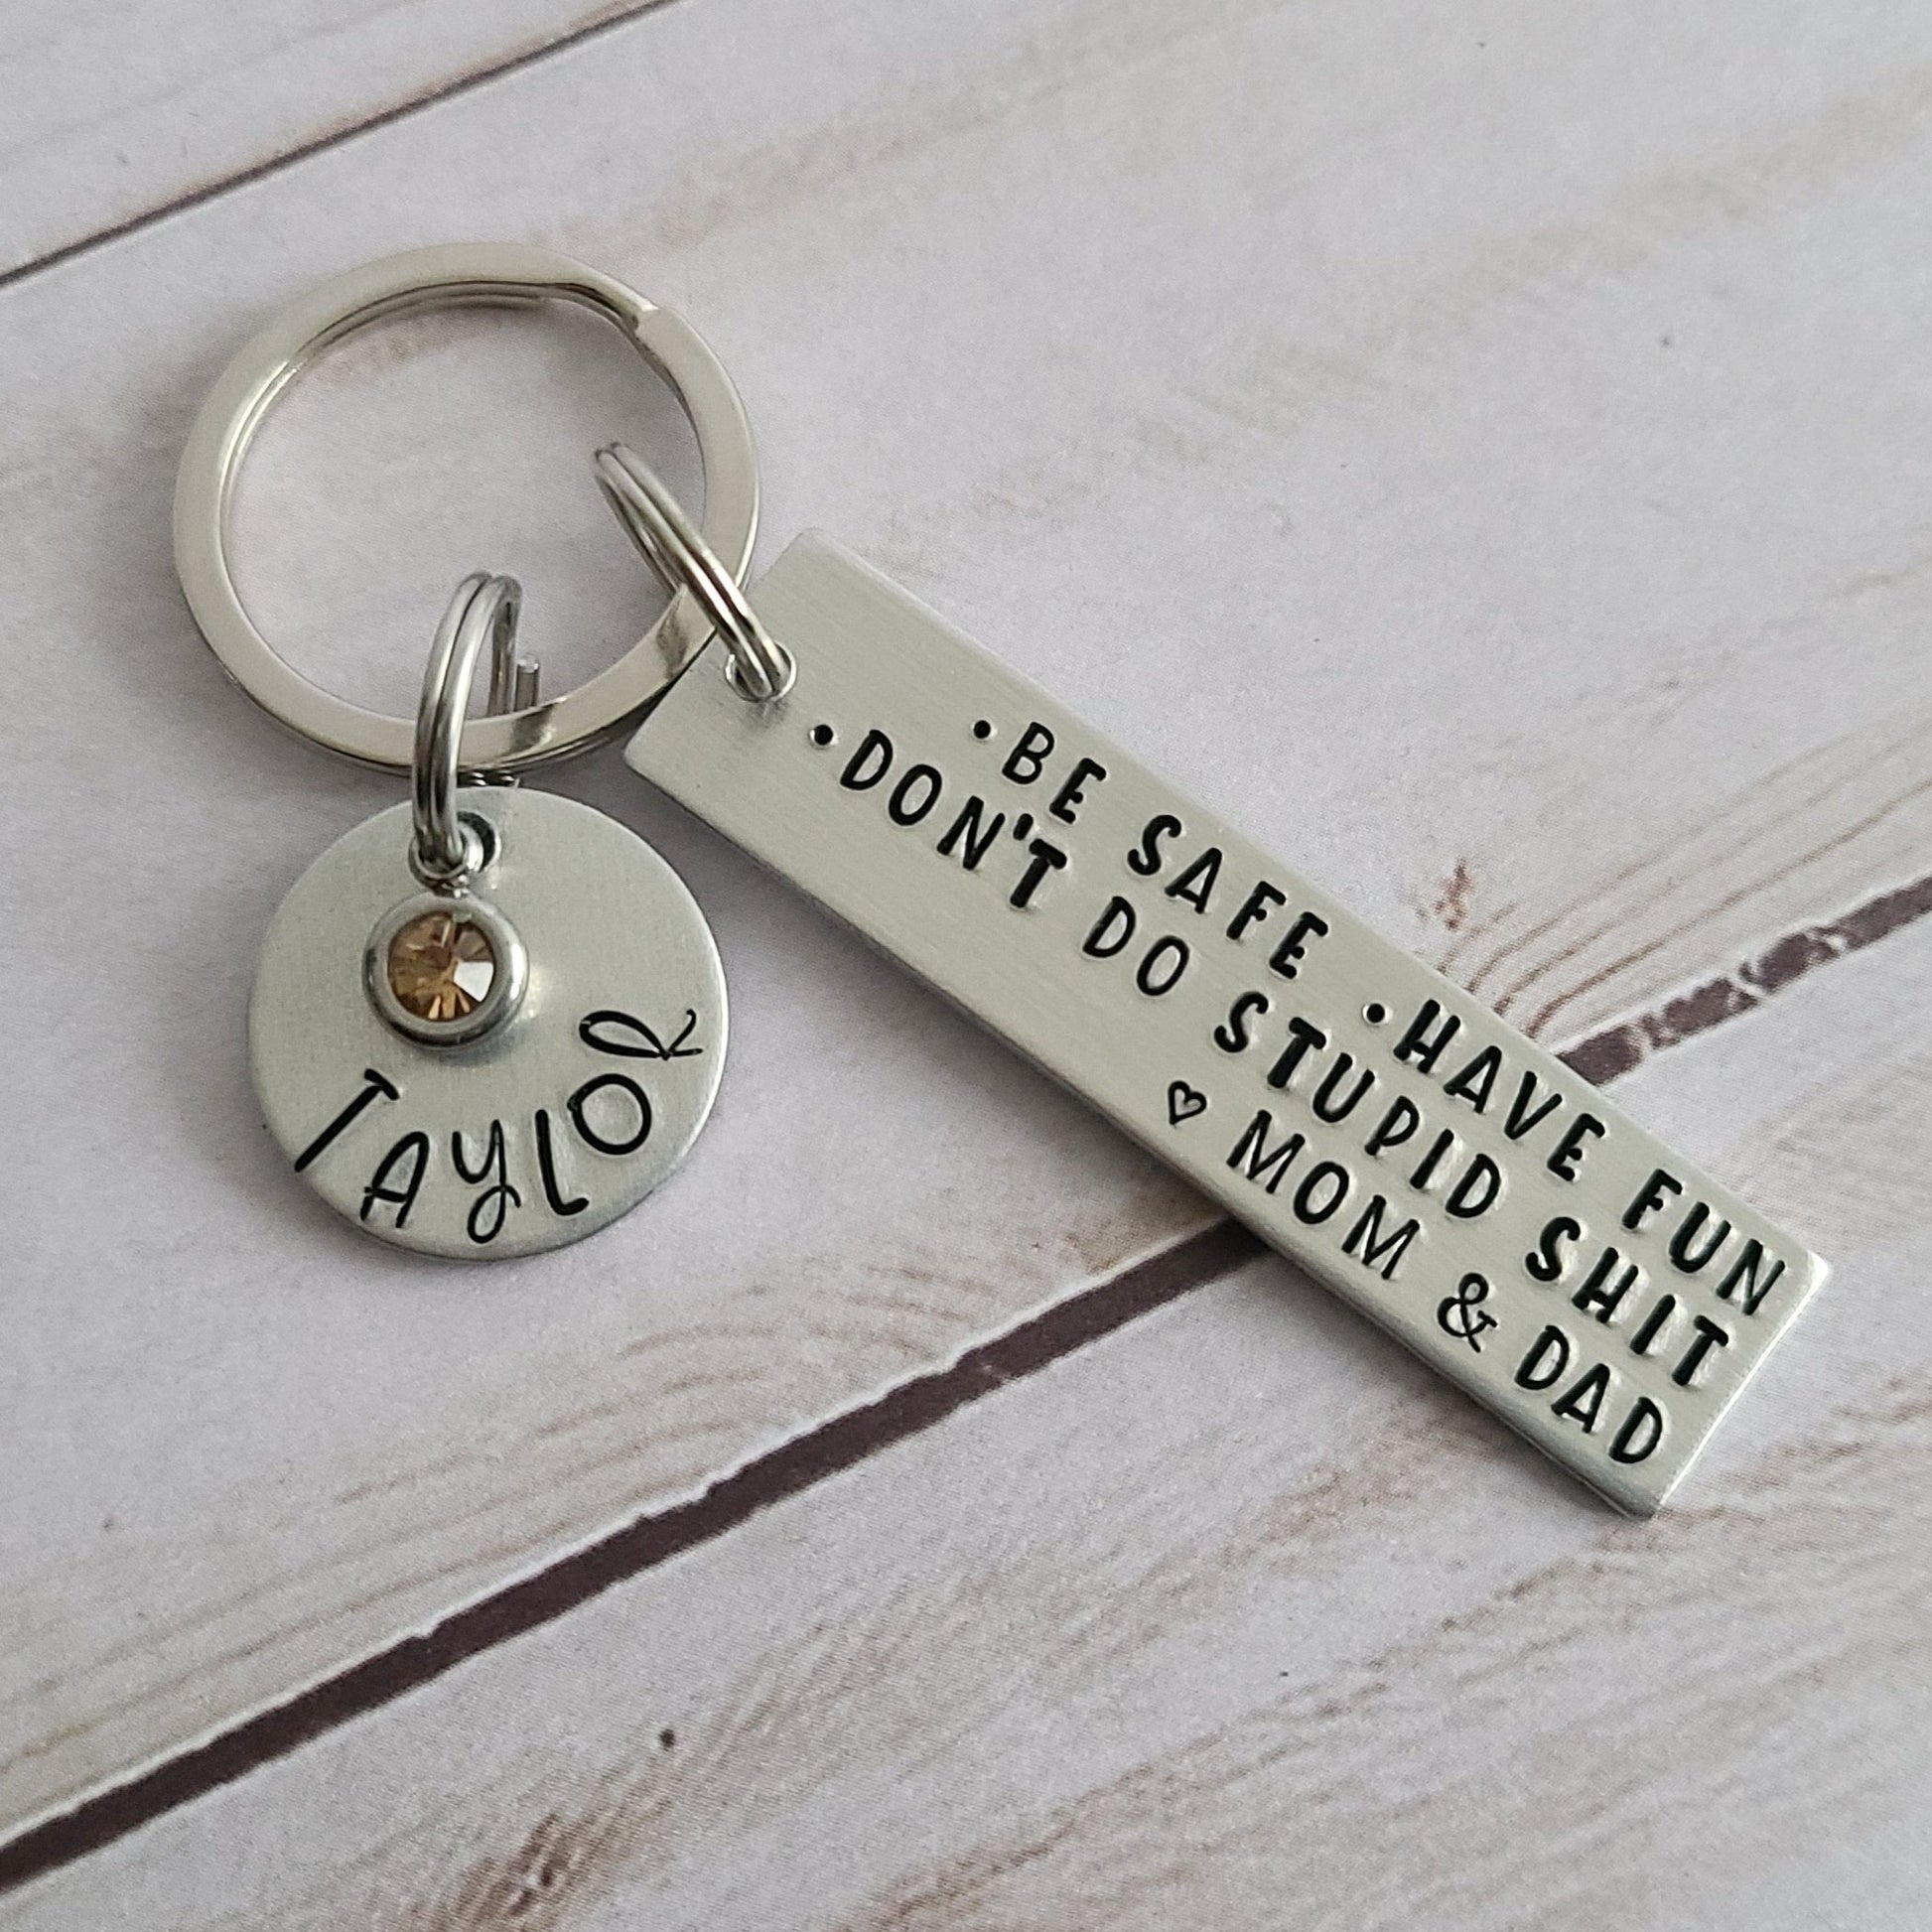 Don't Do Stupid Shit Keychain, 16th Birthday Gift, Stainless Steel, Love  Mom, Love Dad, Love Mom & Dad, Gift for Son, Gift for Daughter, Christmas